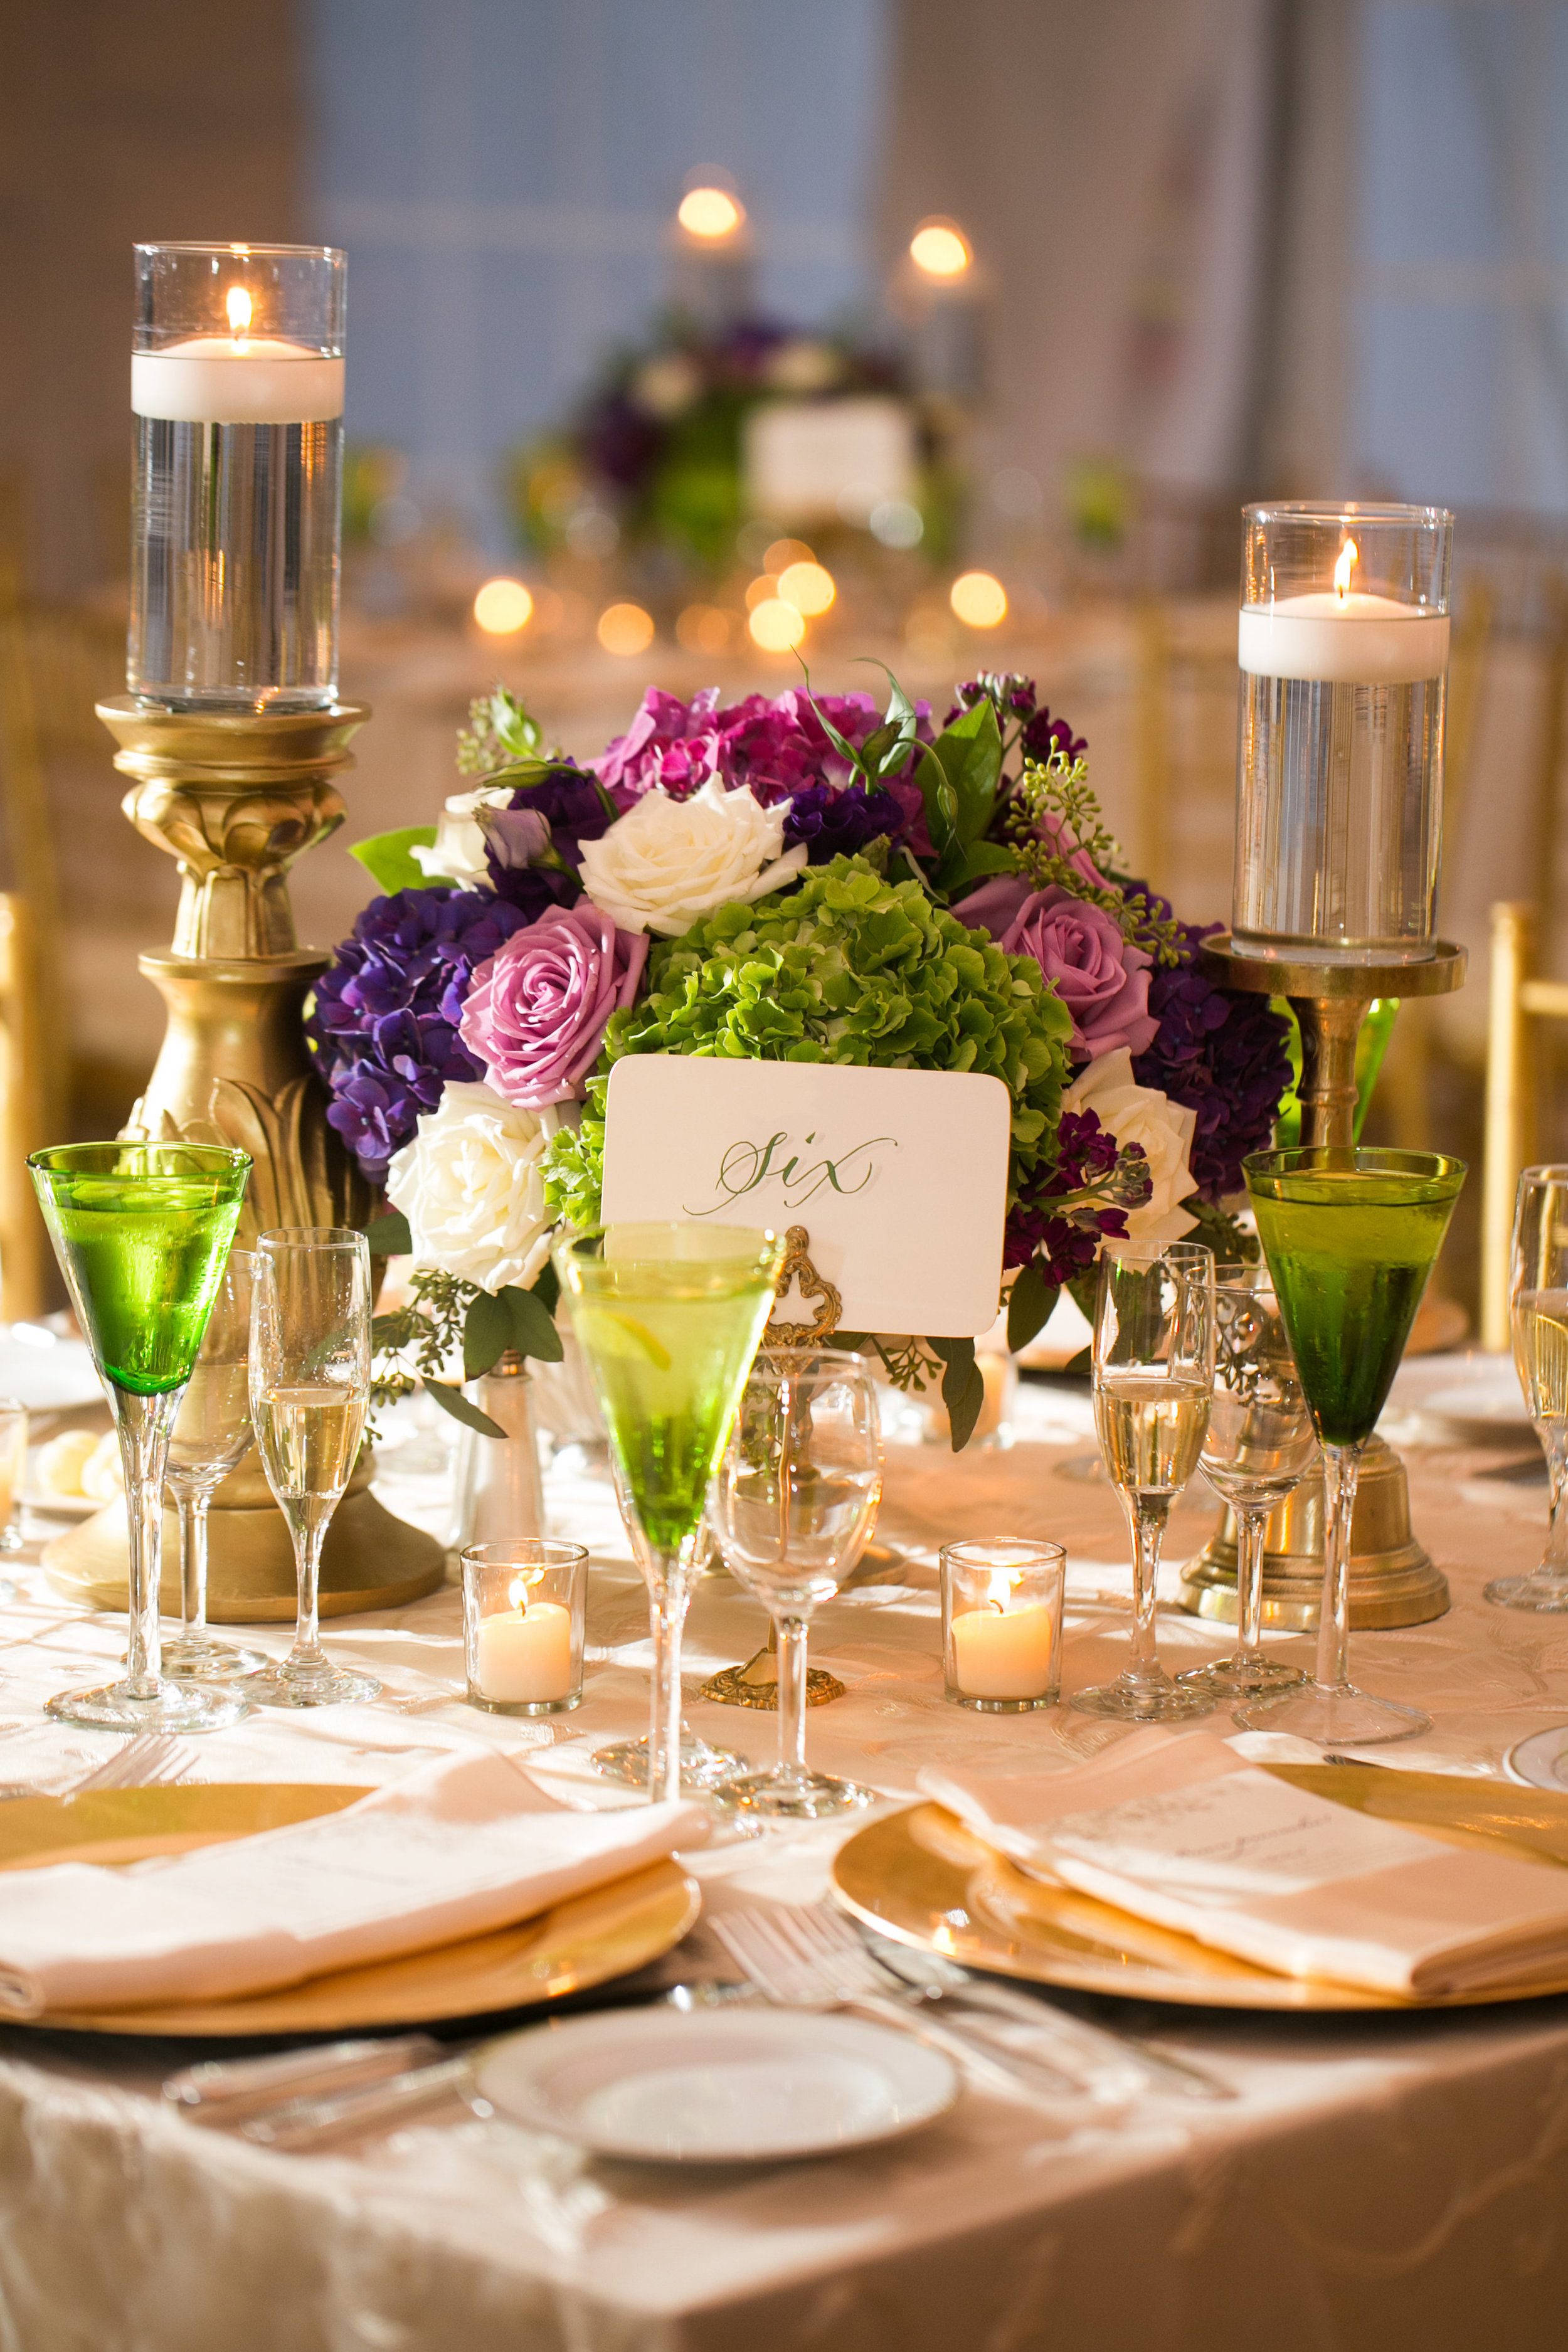 The low centerpiece in the tent was a lush purple, green, lavender and white arrangement in a gold pedestal vase, flanked by two timeless "old gold" candlesticks.&nbsp;